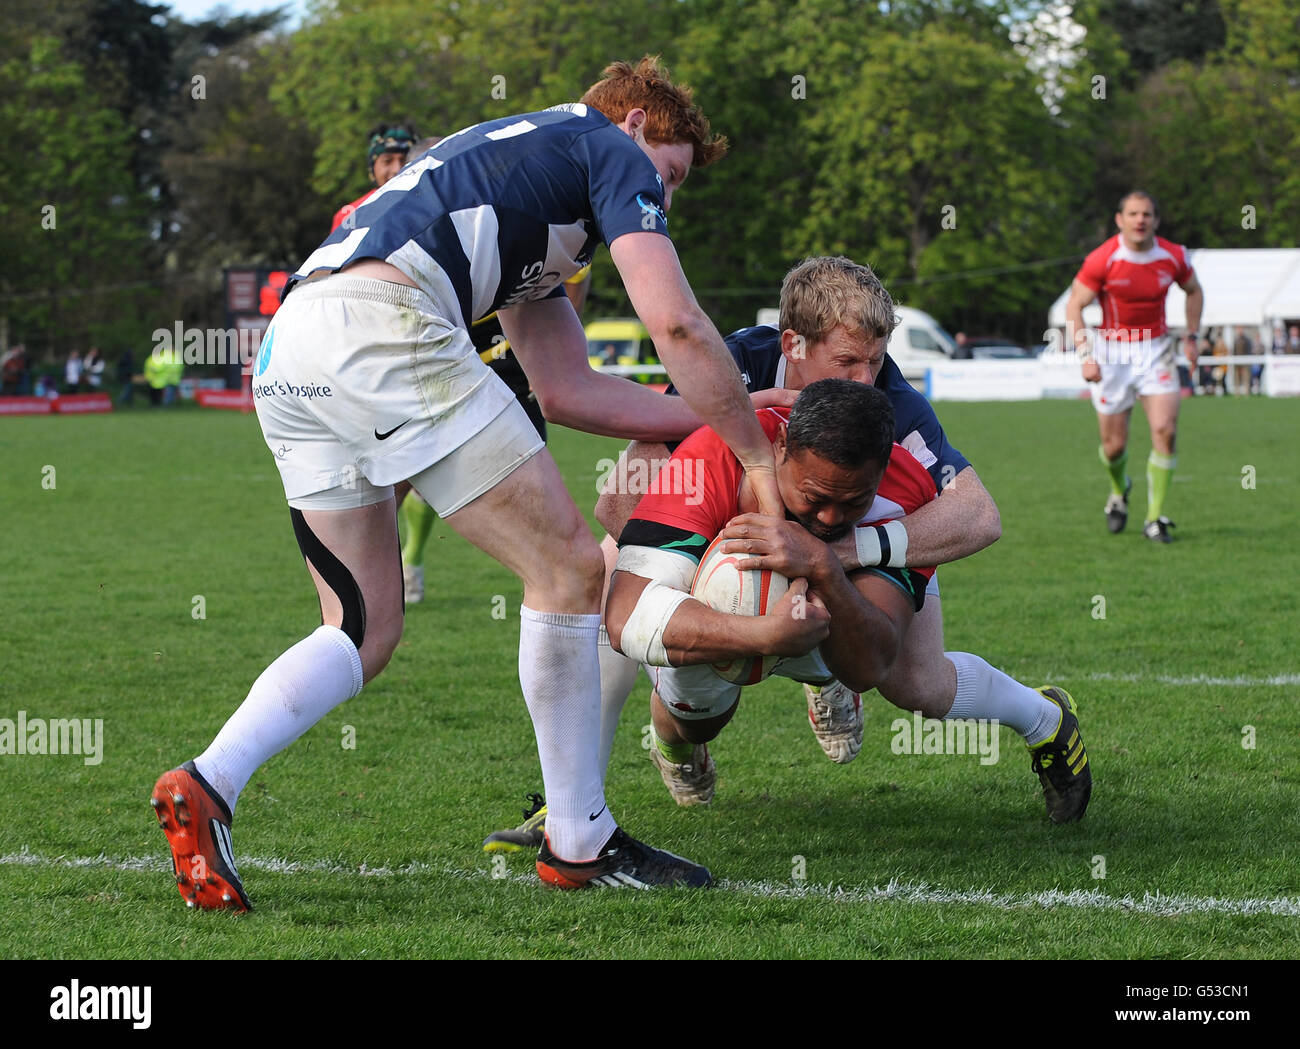 London Welsh's Vili Ma'asi powers towards the try line to score his first try as he is tackled by Bristol's Tom Slater (right) and Jack Tovey (left) Stock Photo